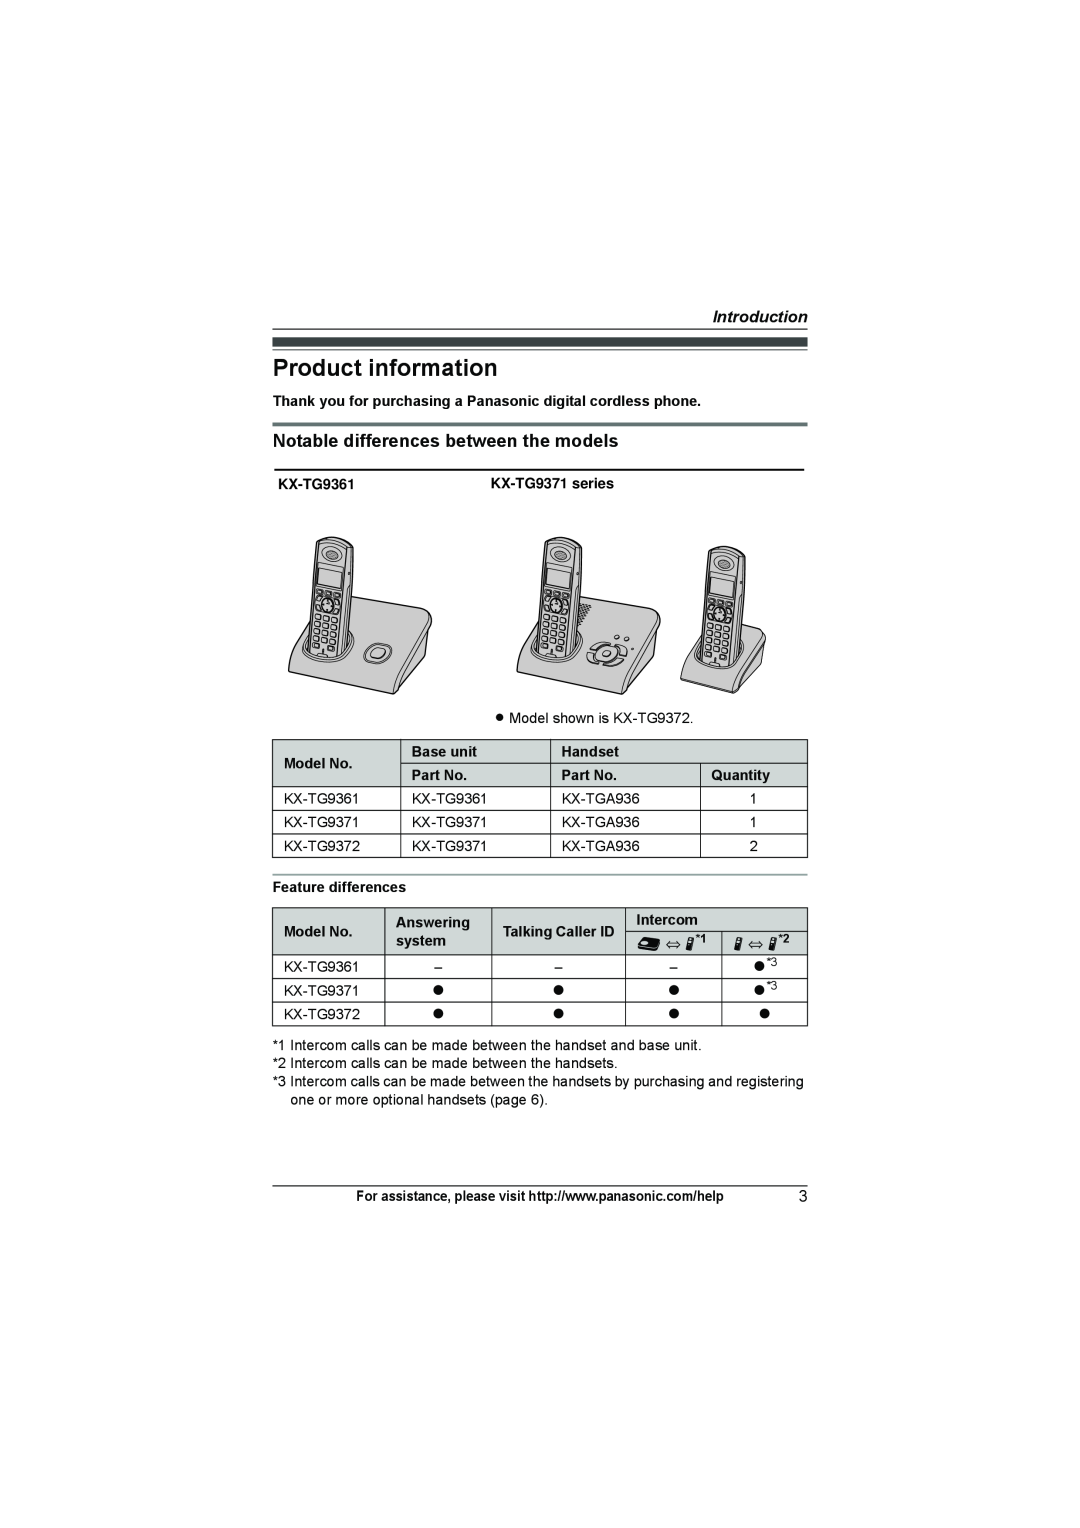 Panasonic KX-TG9361 Product information, Notable differences between the models, Introduction, Model No, Base unit, system 